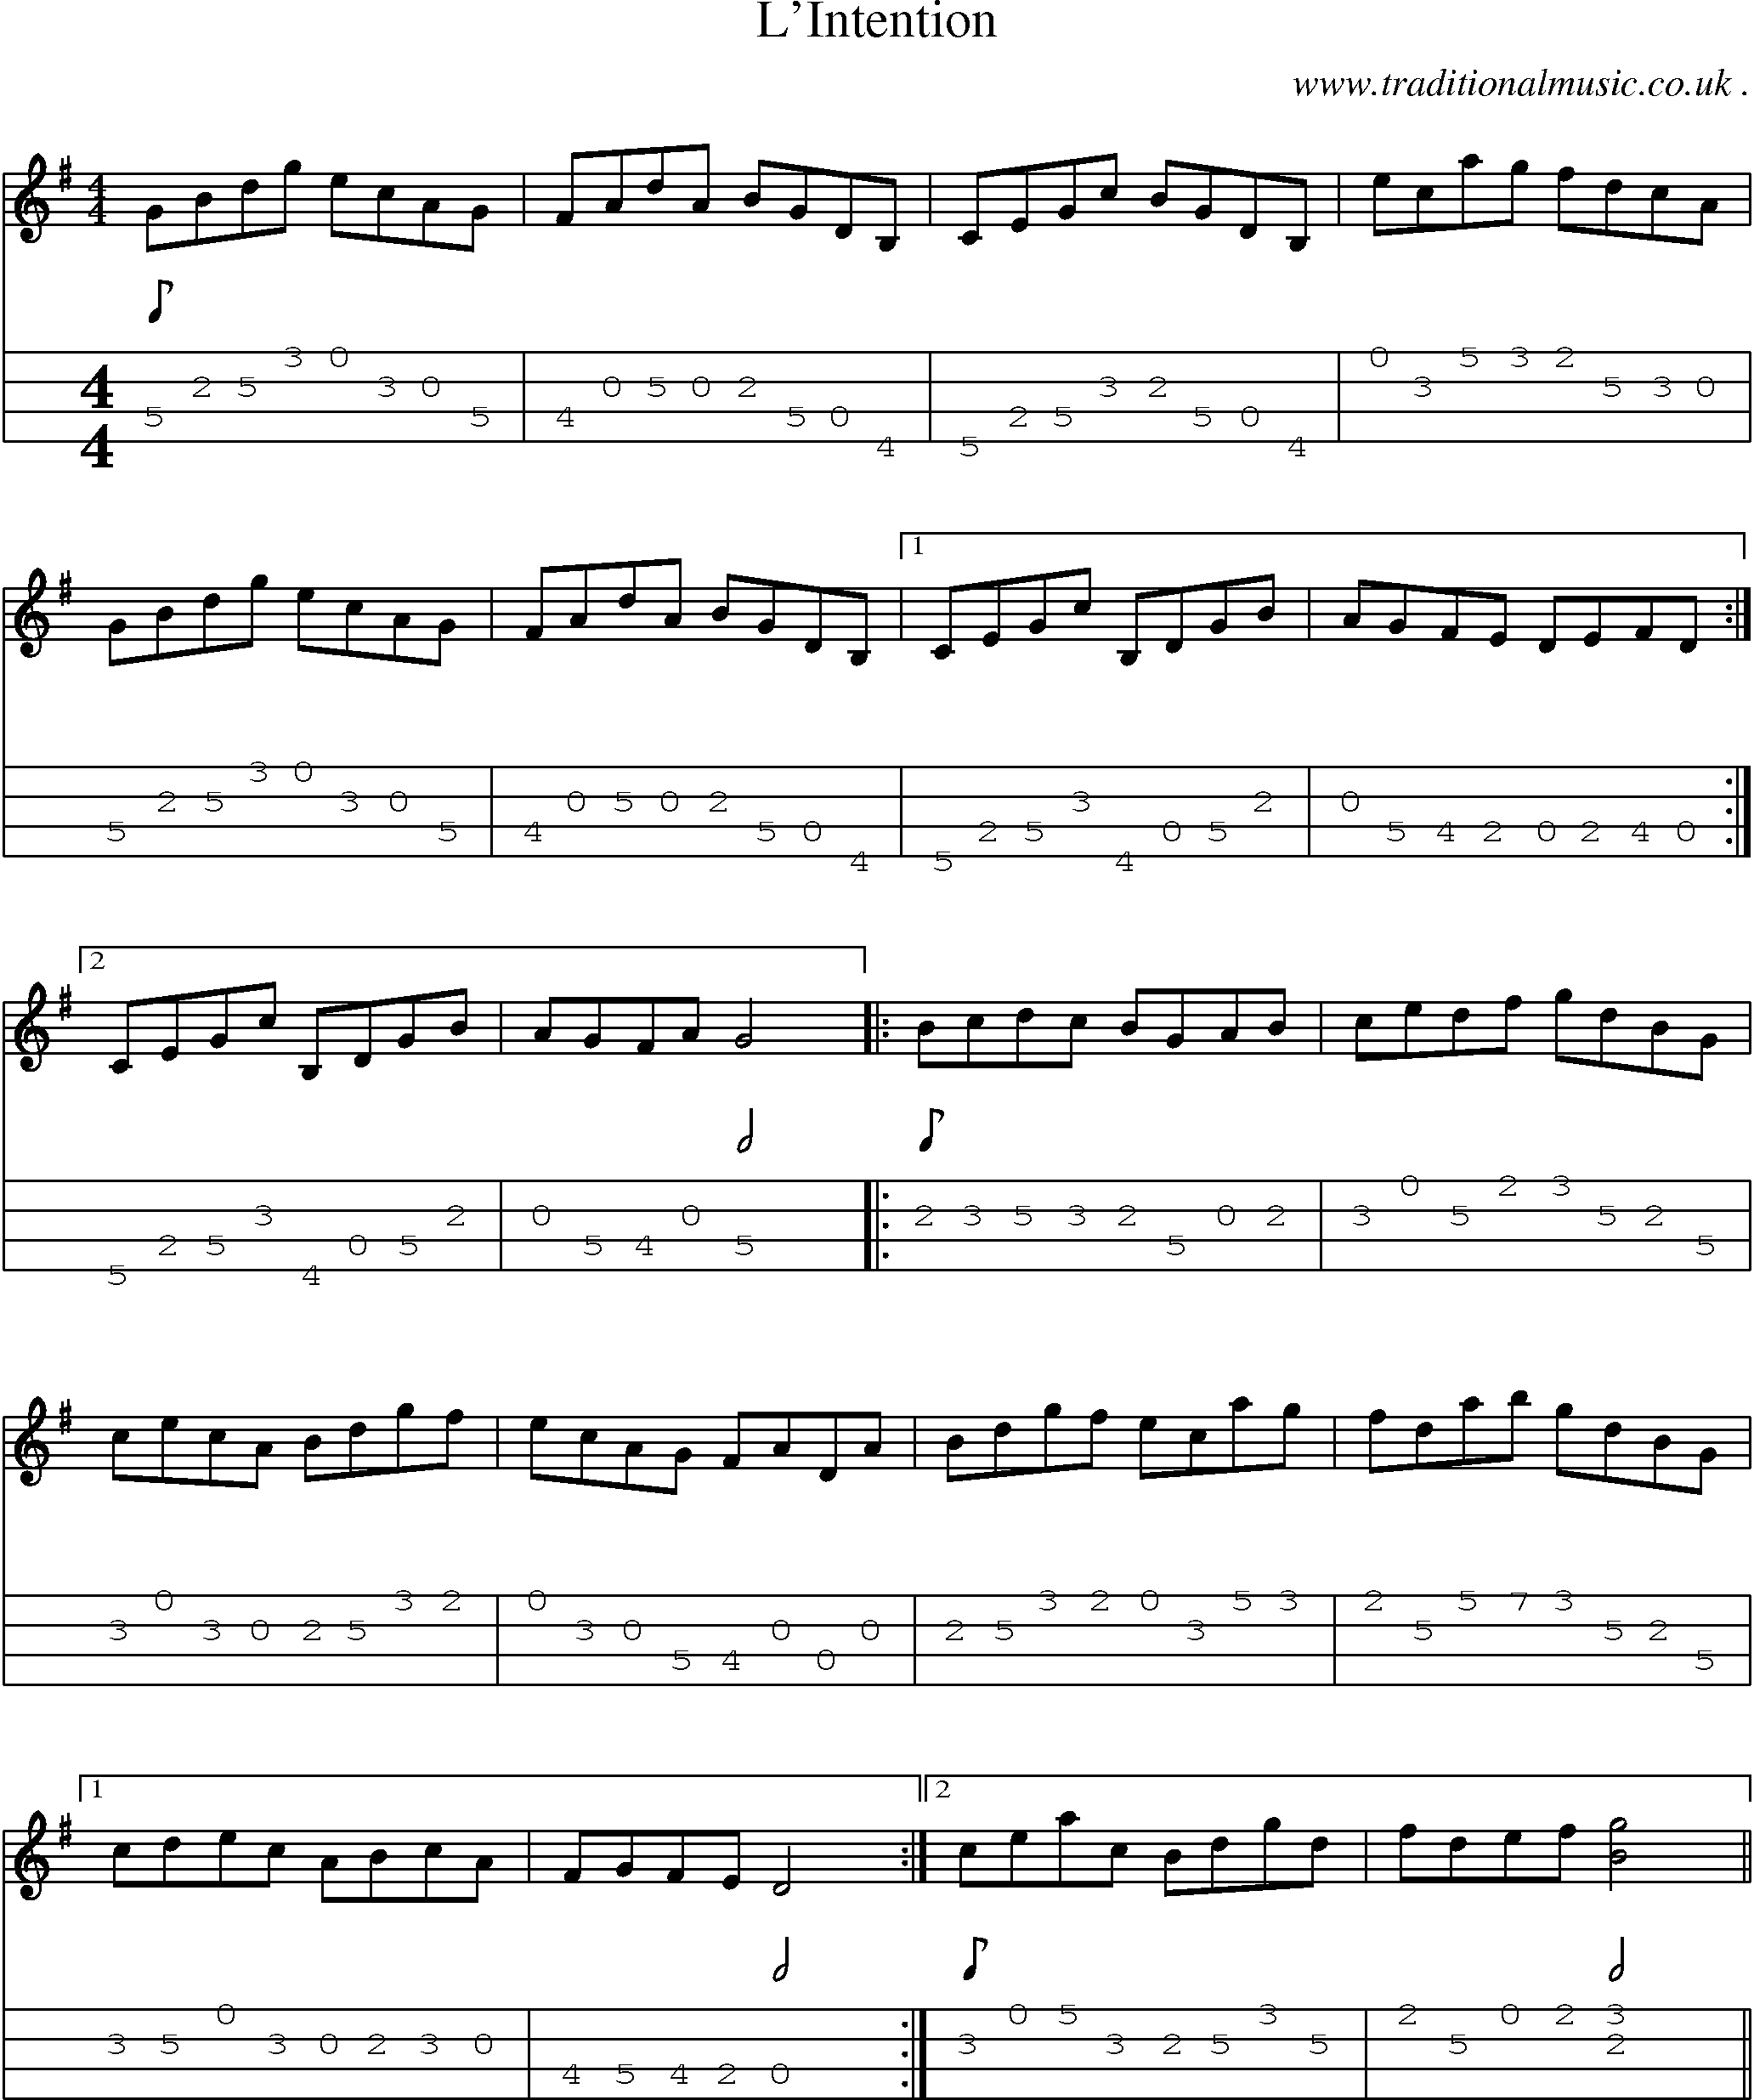 Sheet-Music and Mandolin Tabs for Lintention